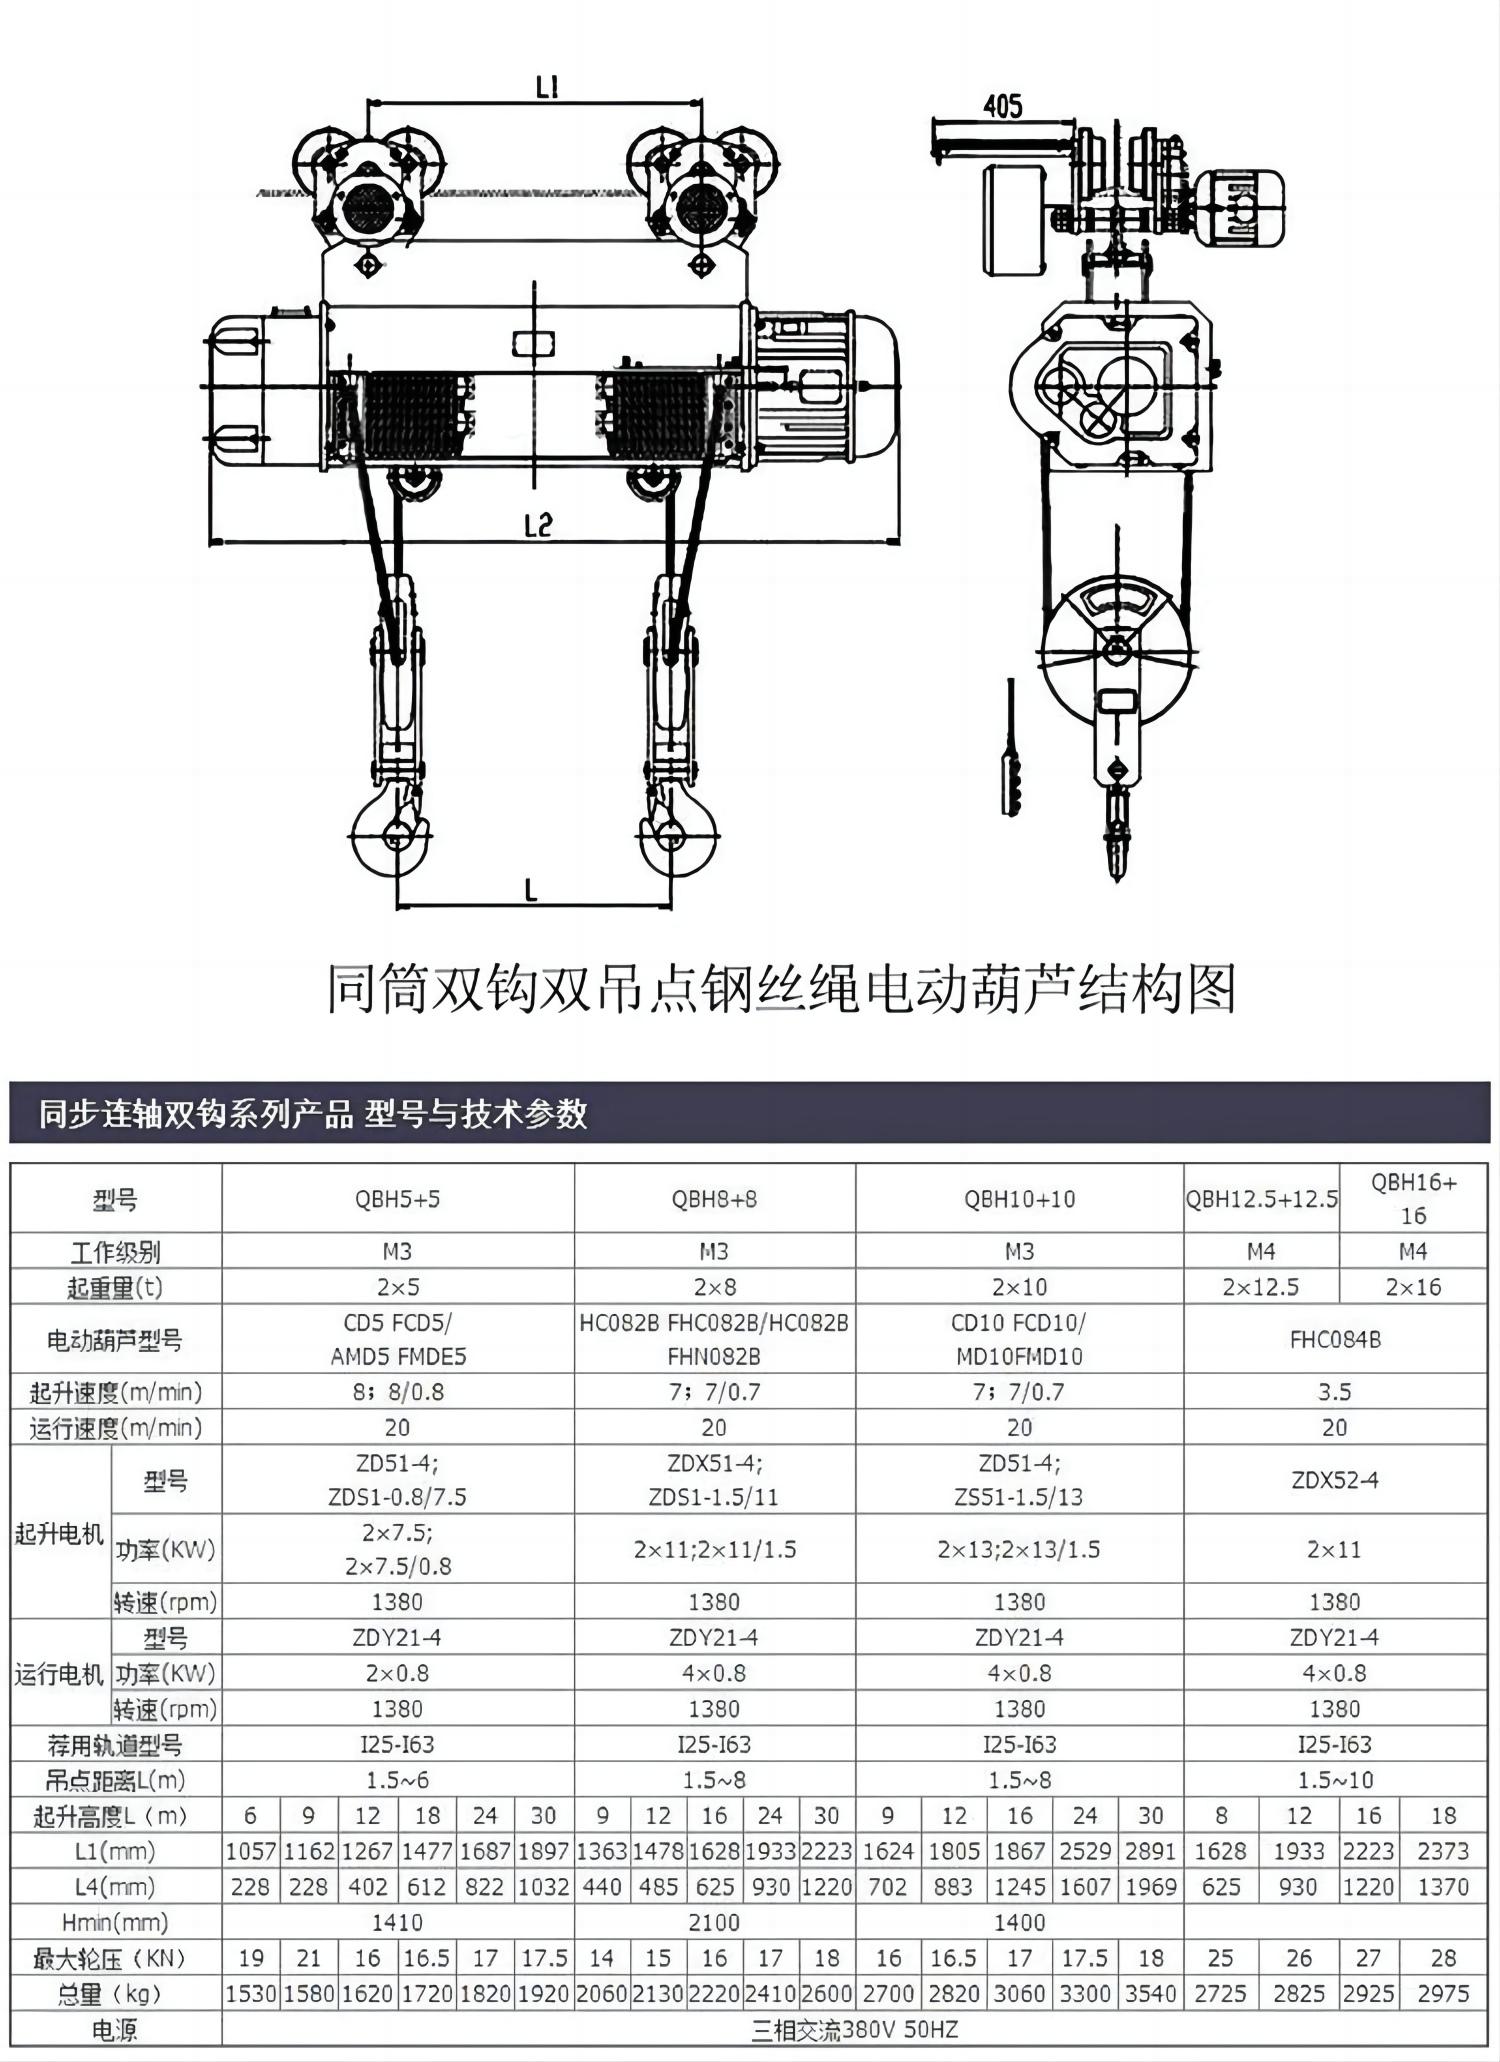 YOUQI Electric hoist with the same cylinder and double lifting point4jb